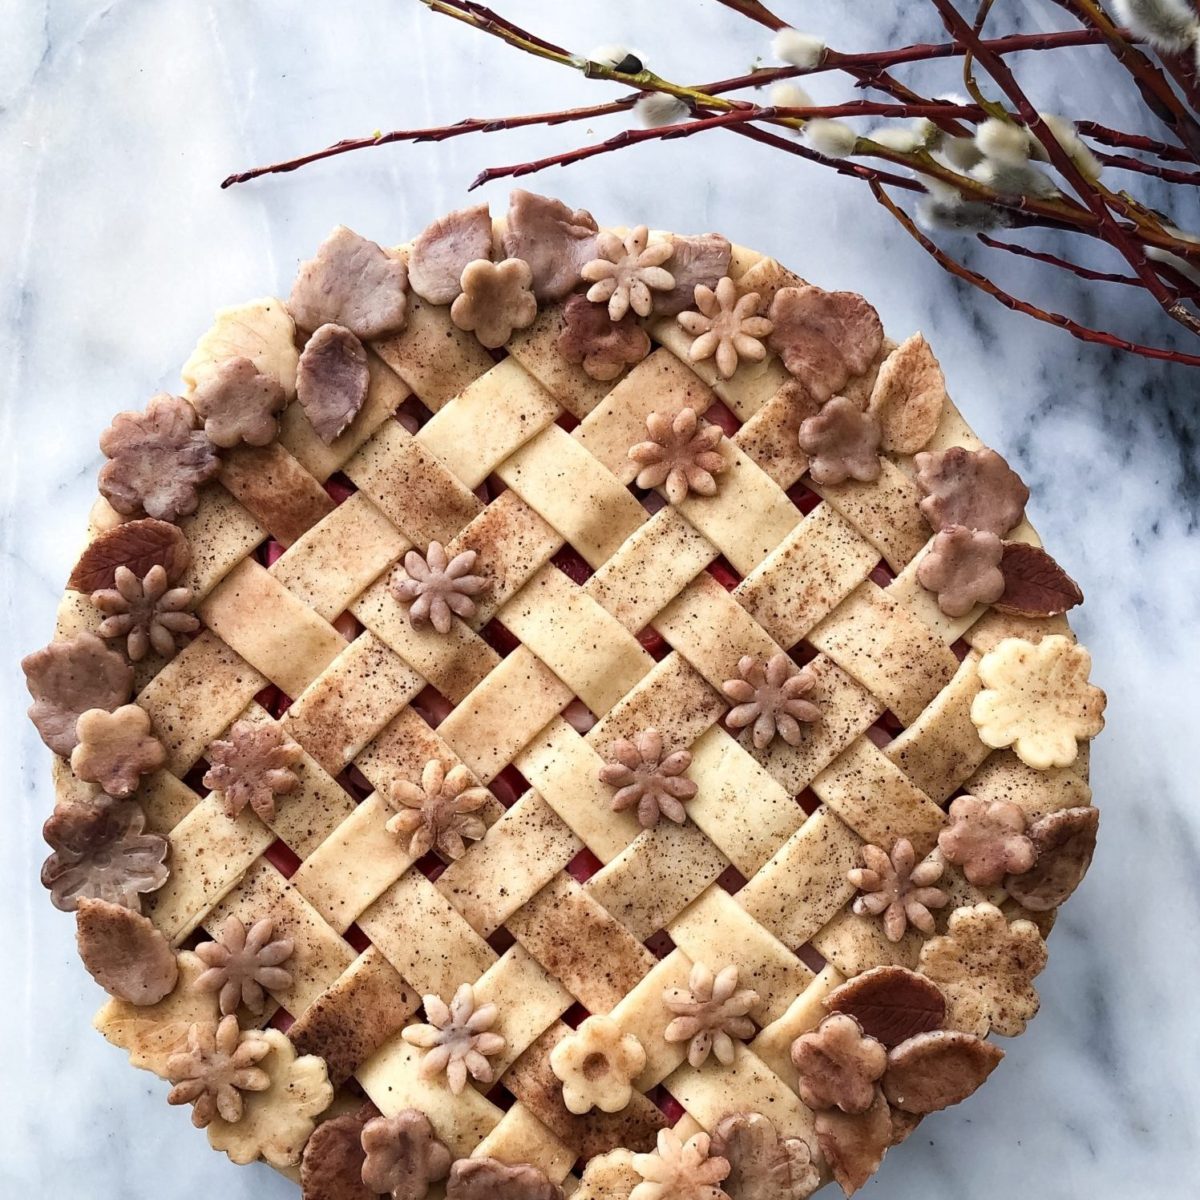 Strawberry Rhubarb Pie with Urfa Biber in a Chocolate Coffee Marble Crust, lattice, flower and leaf cut outs